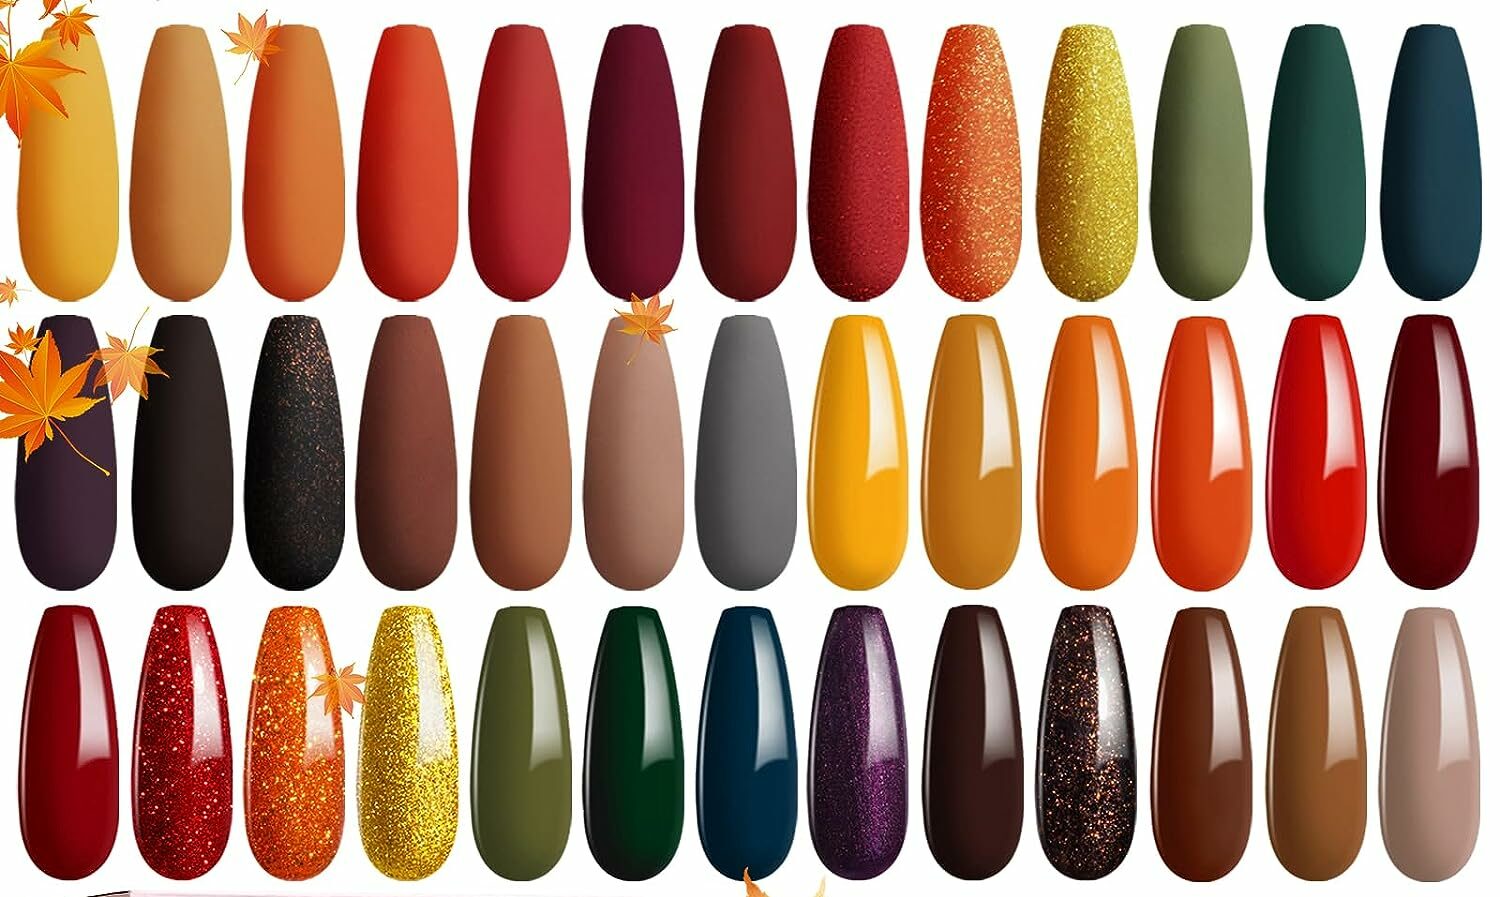 3. "Must-Have Nail Colors for Black Women" - wide 8